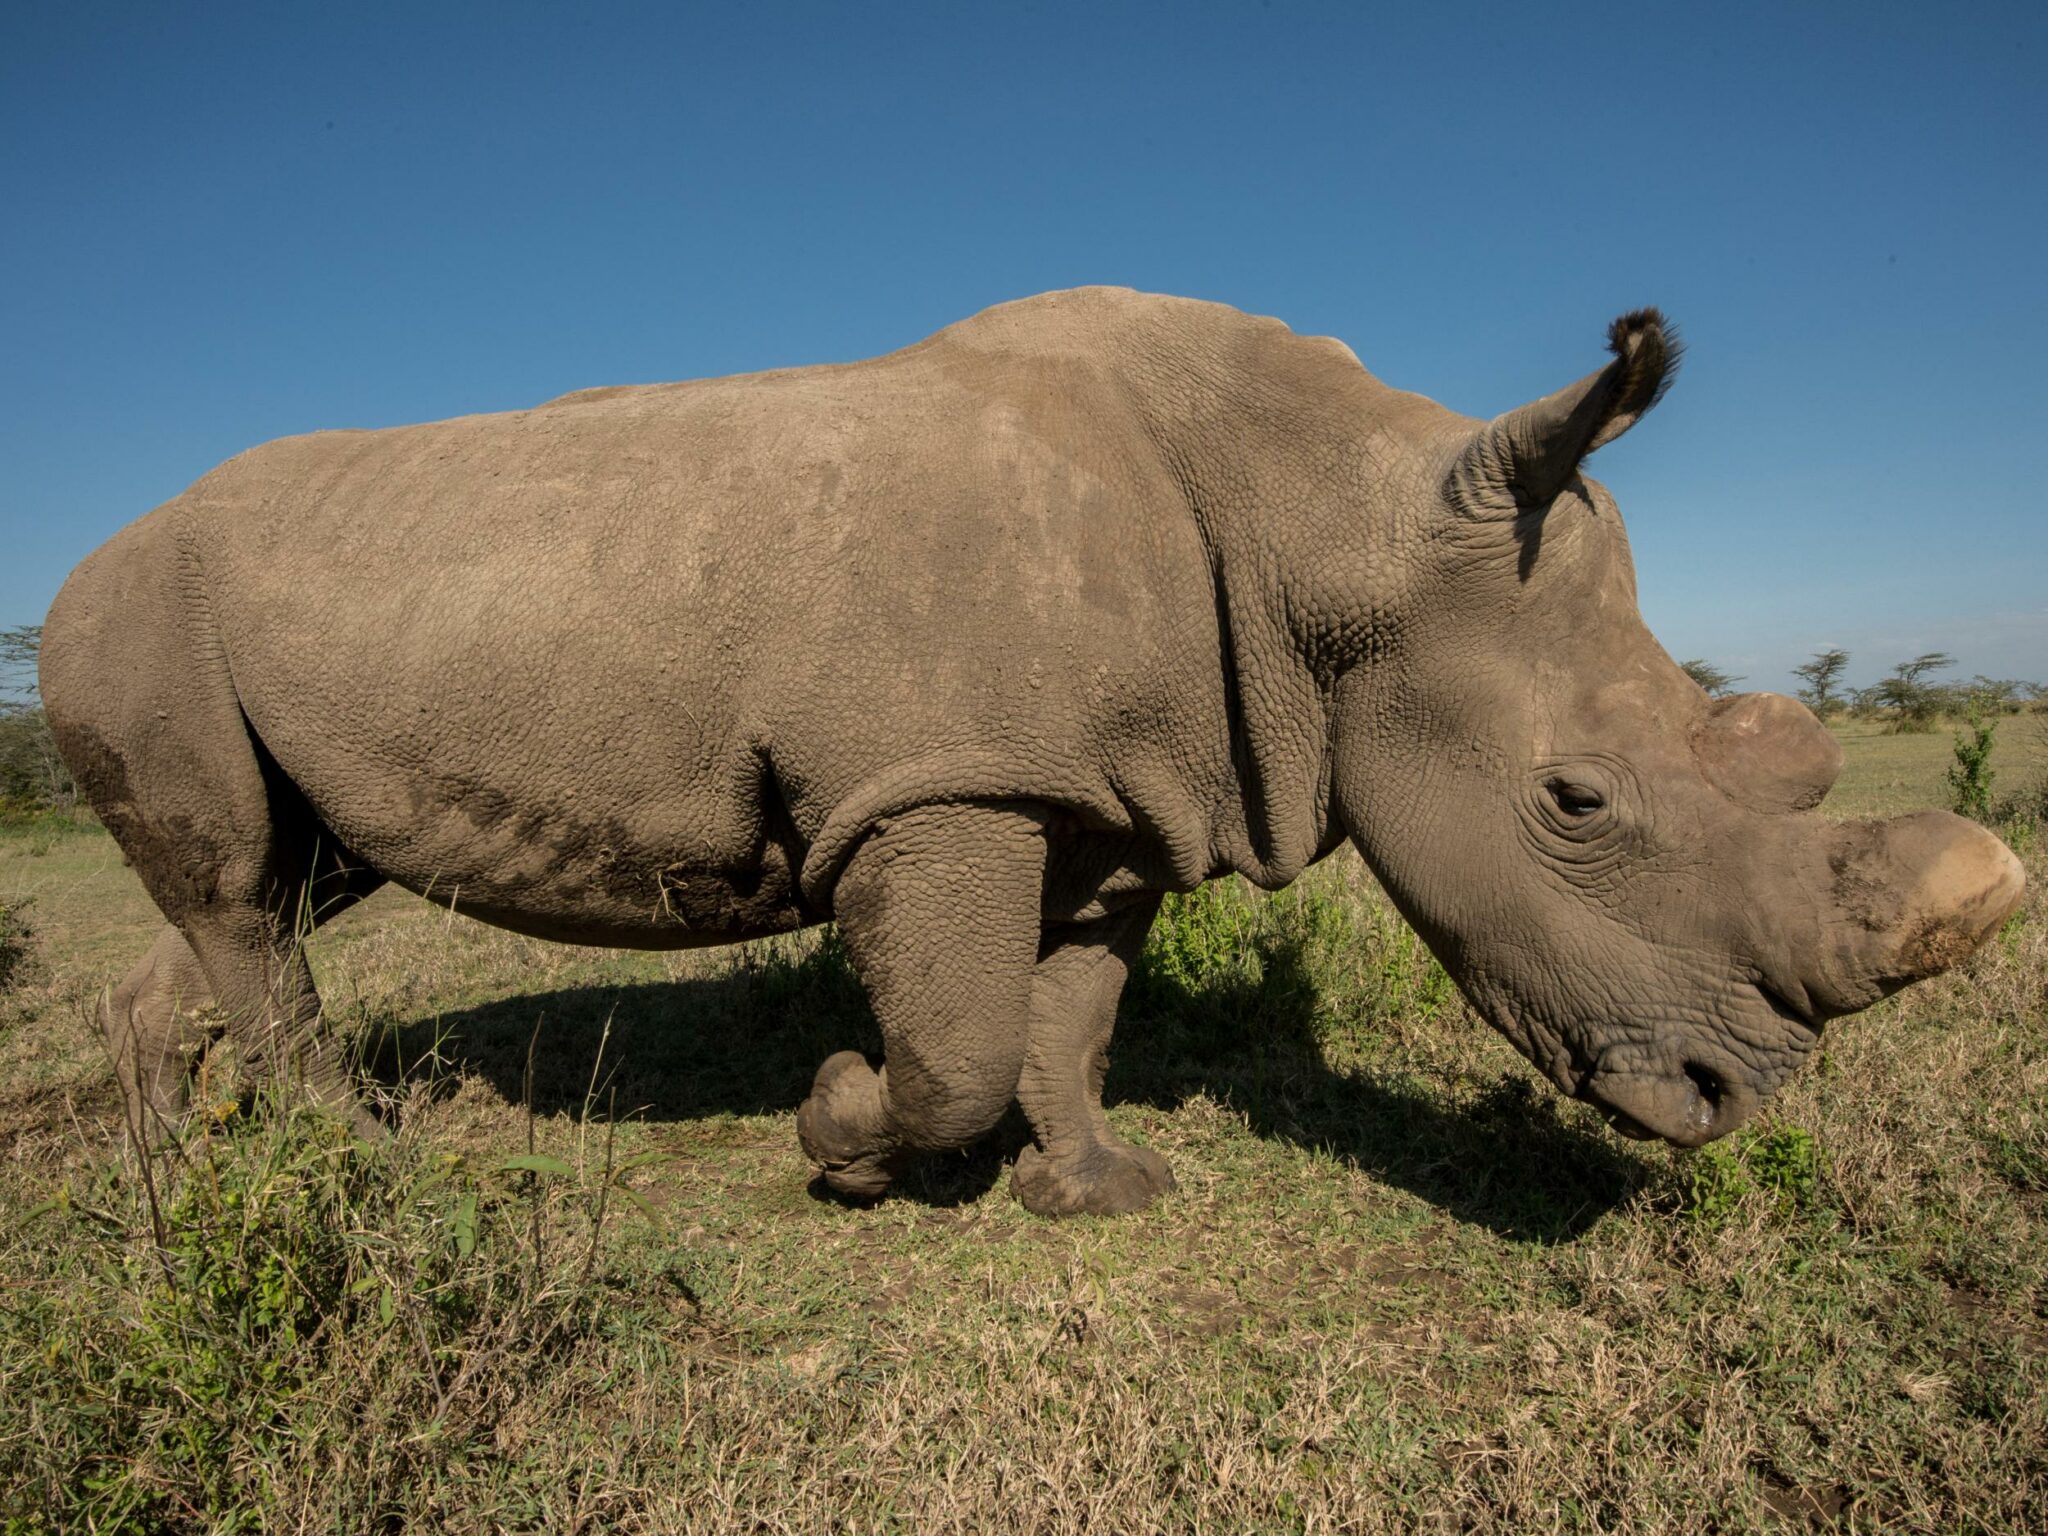 how did the white rhinoceros get its name and where does it come from